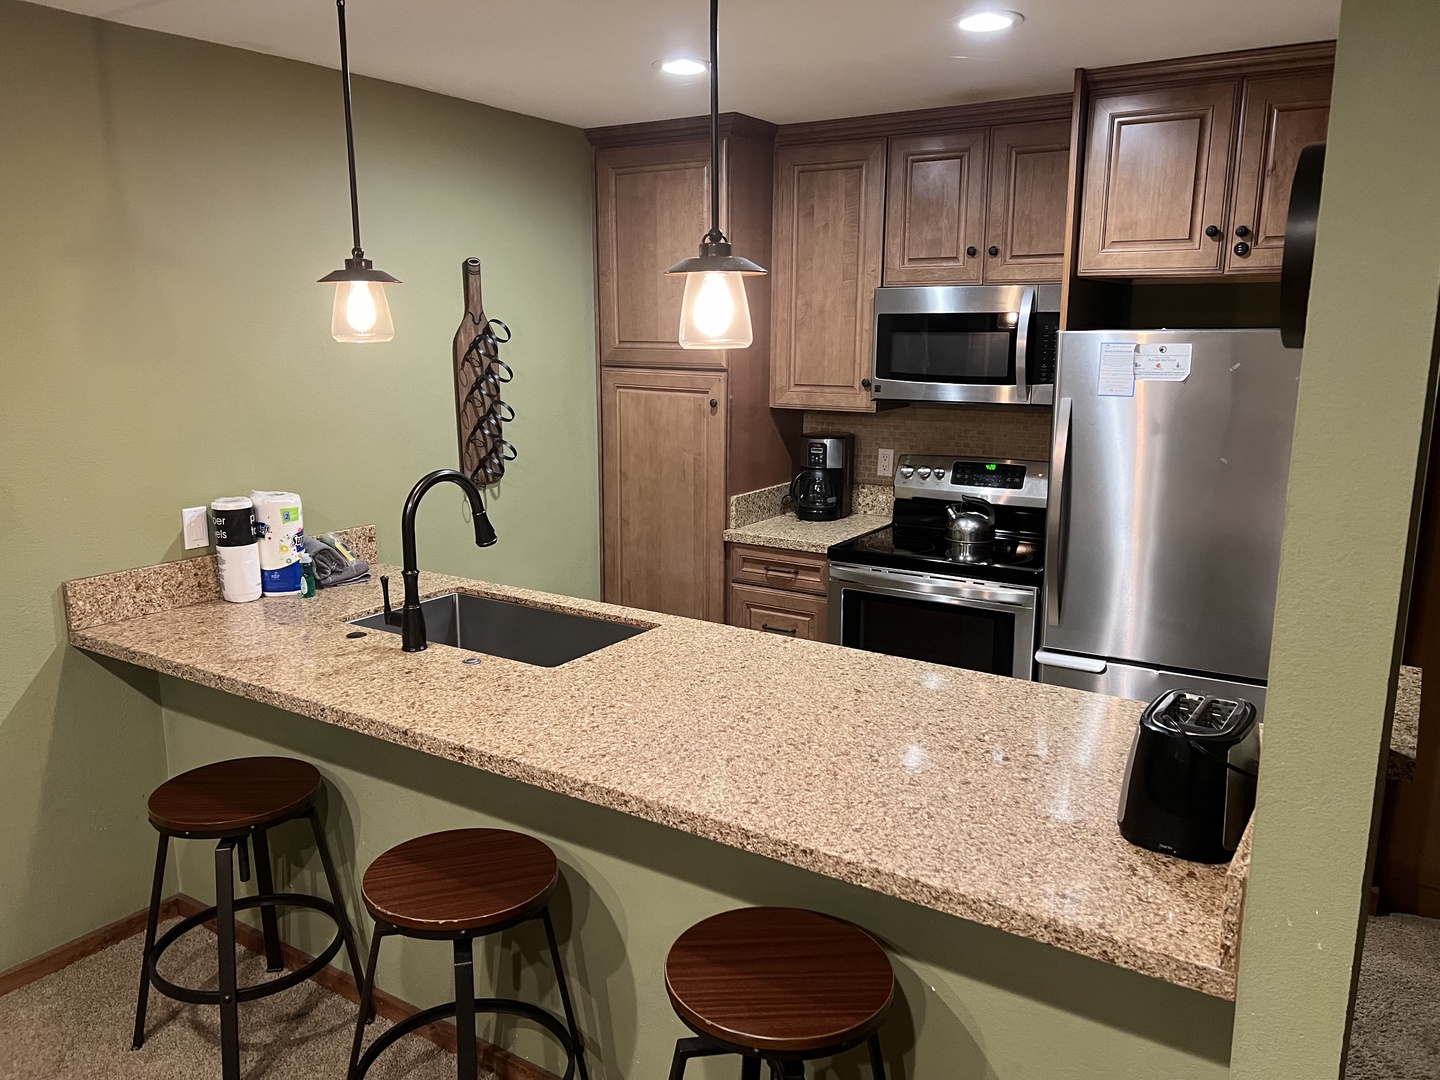 Newly remodeled kitchen with new appliances, breakfast bar for 3